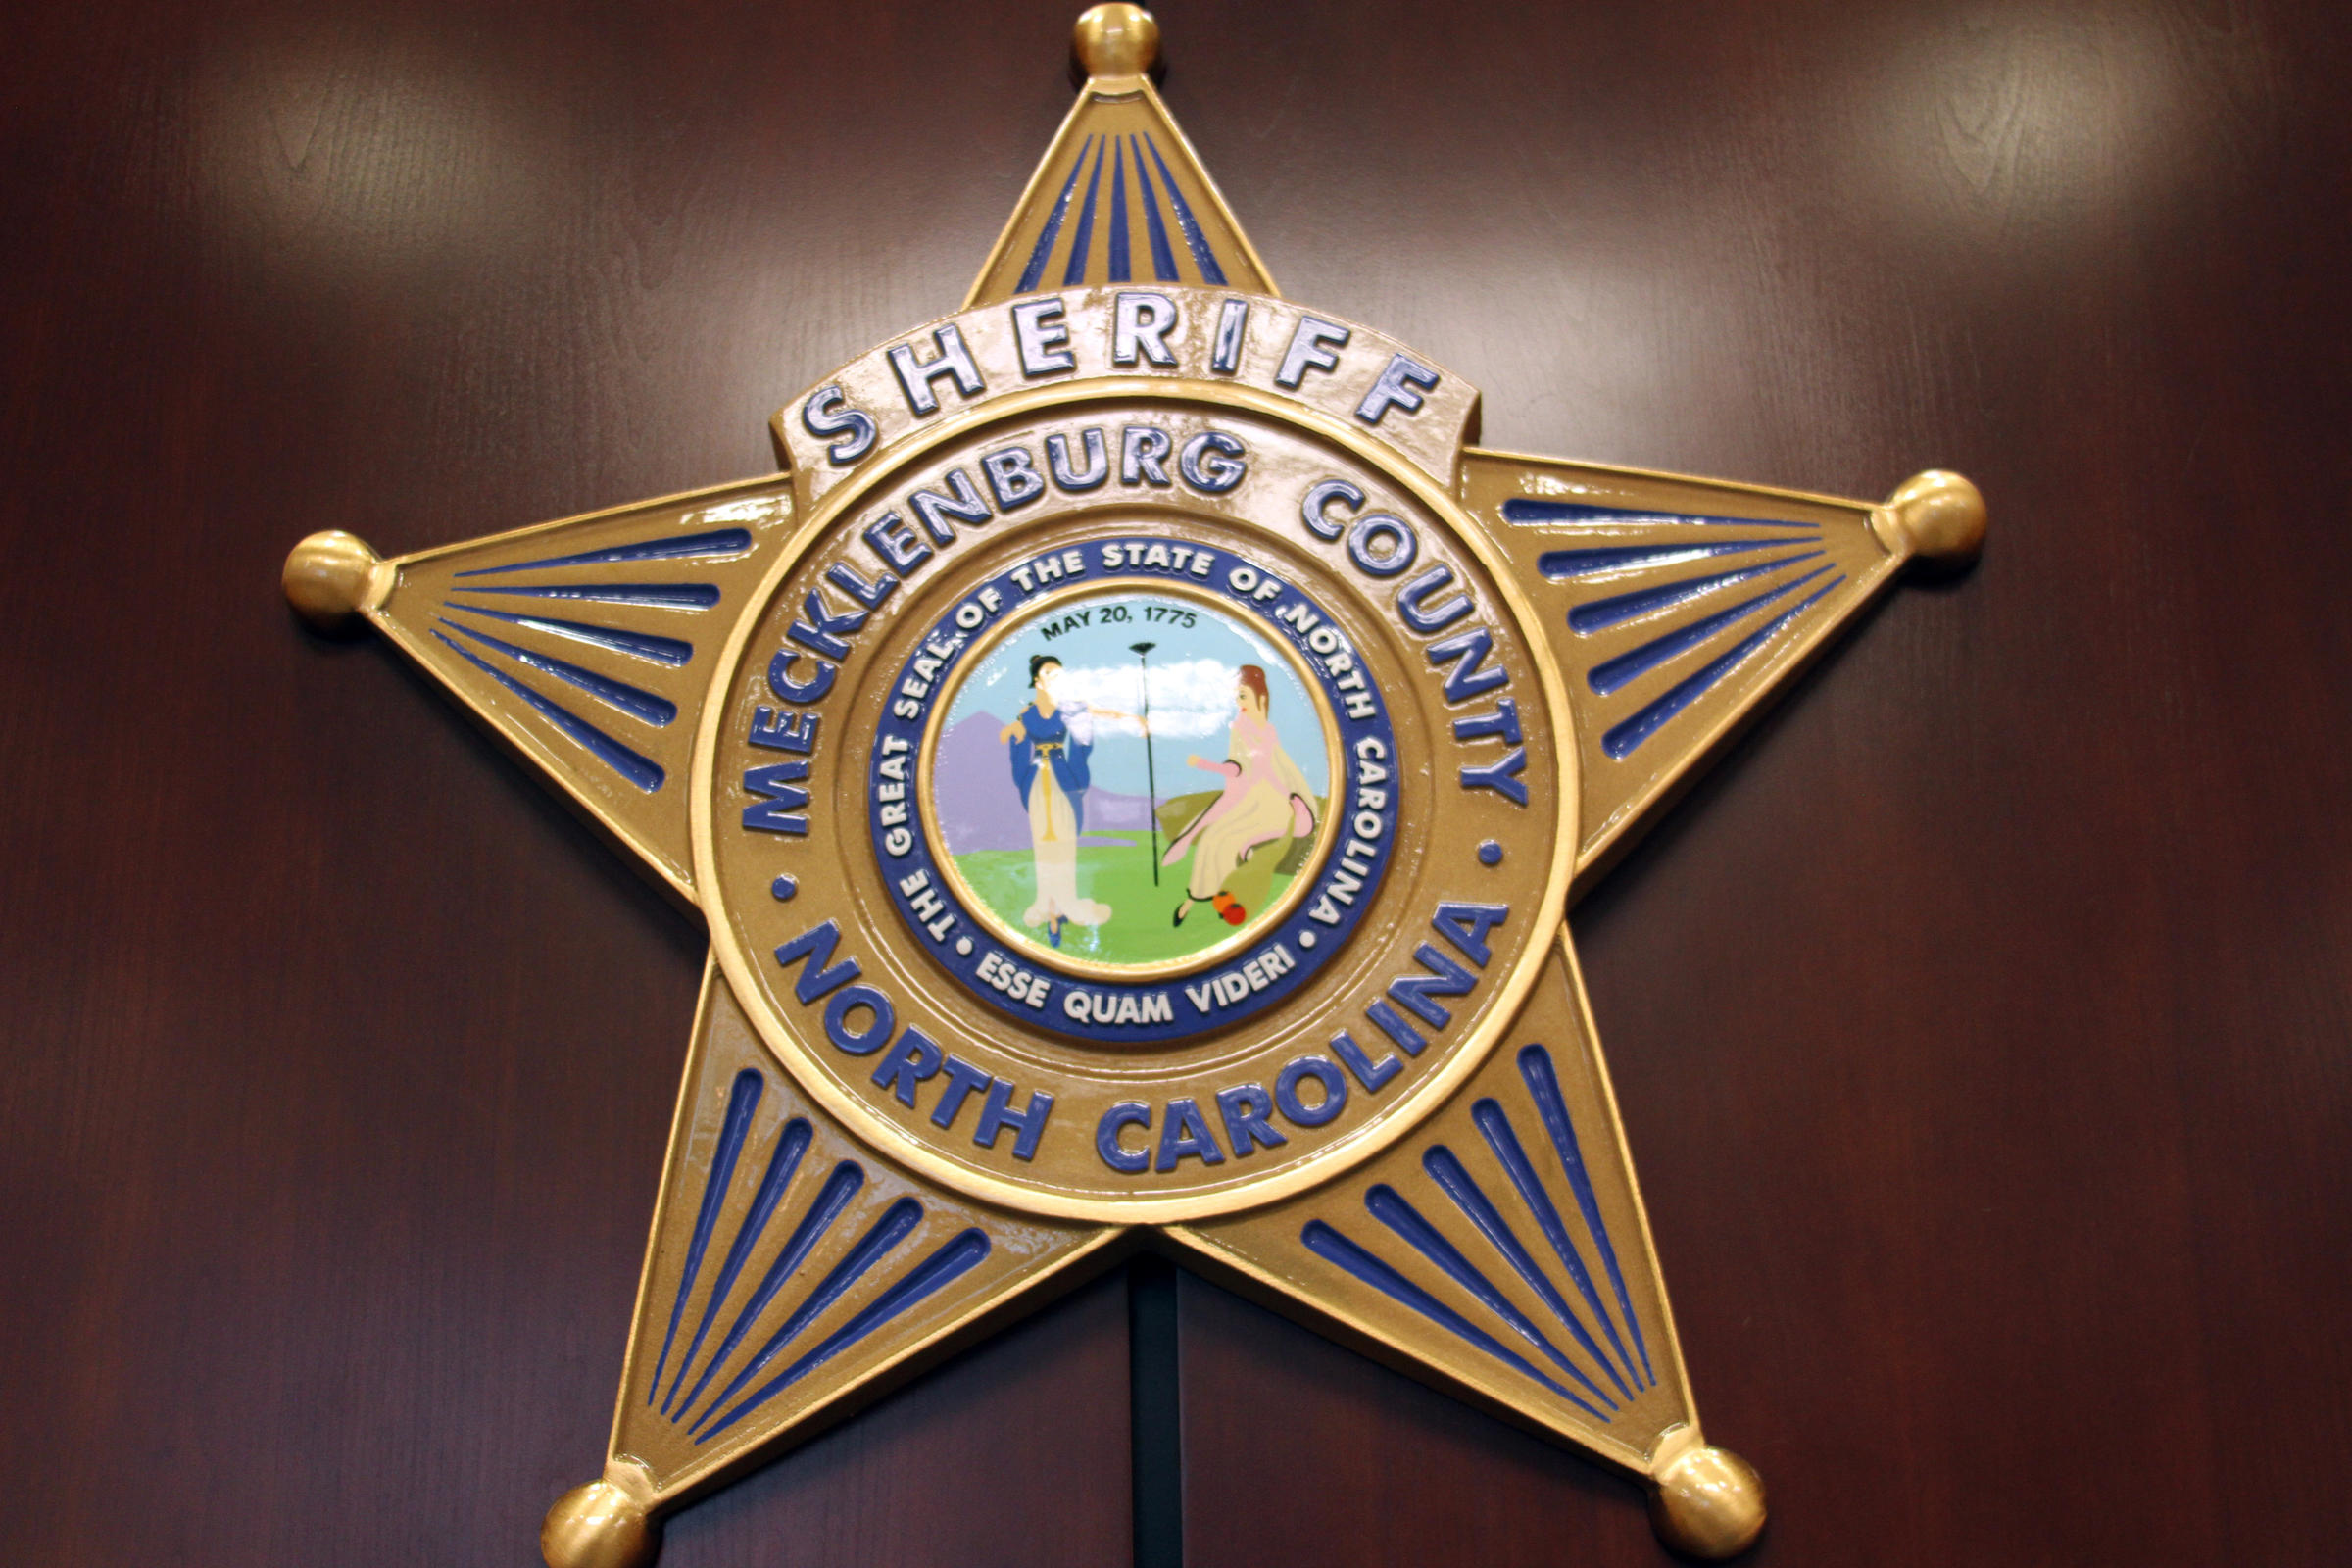 Amid Questions, Meck Sheriff Puts Controversial 287g Program On Display